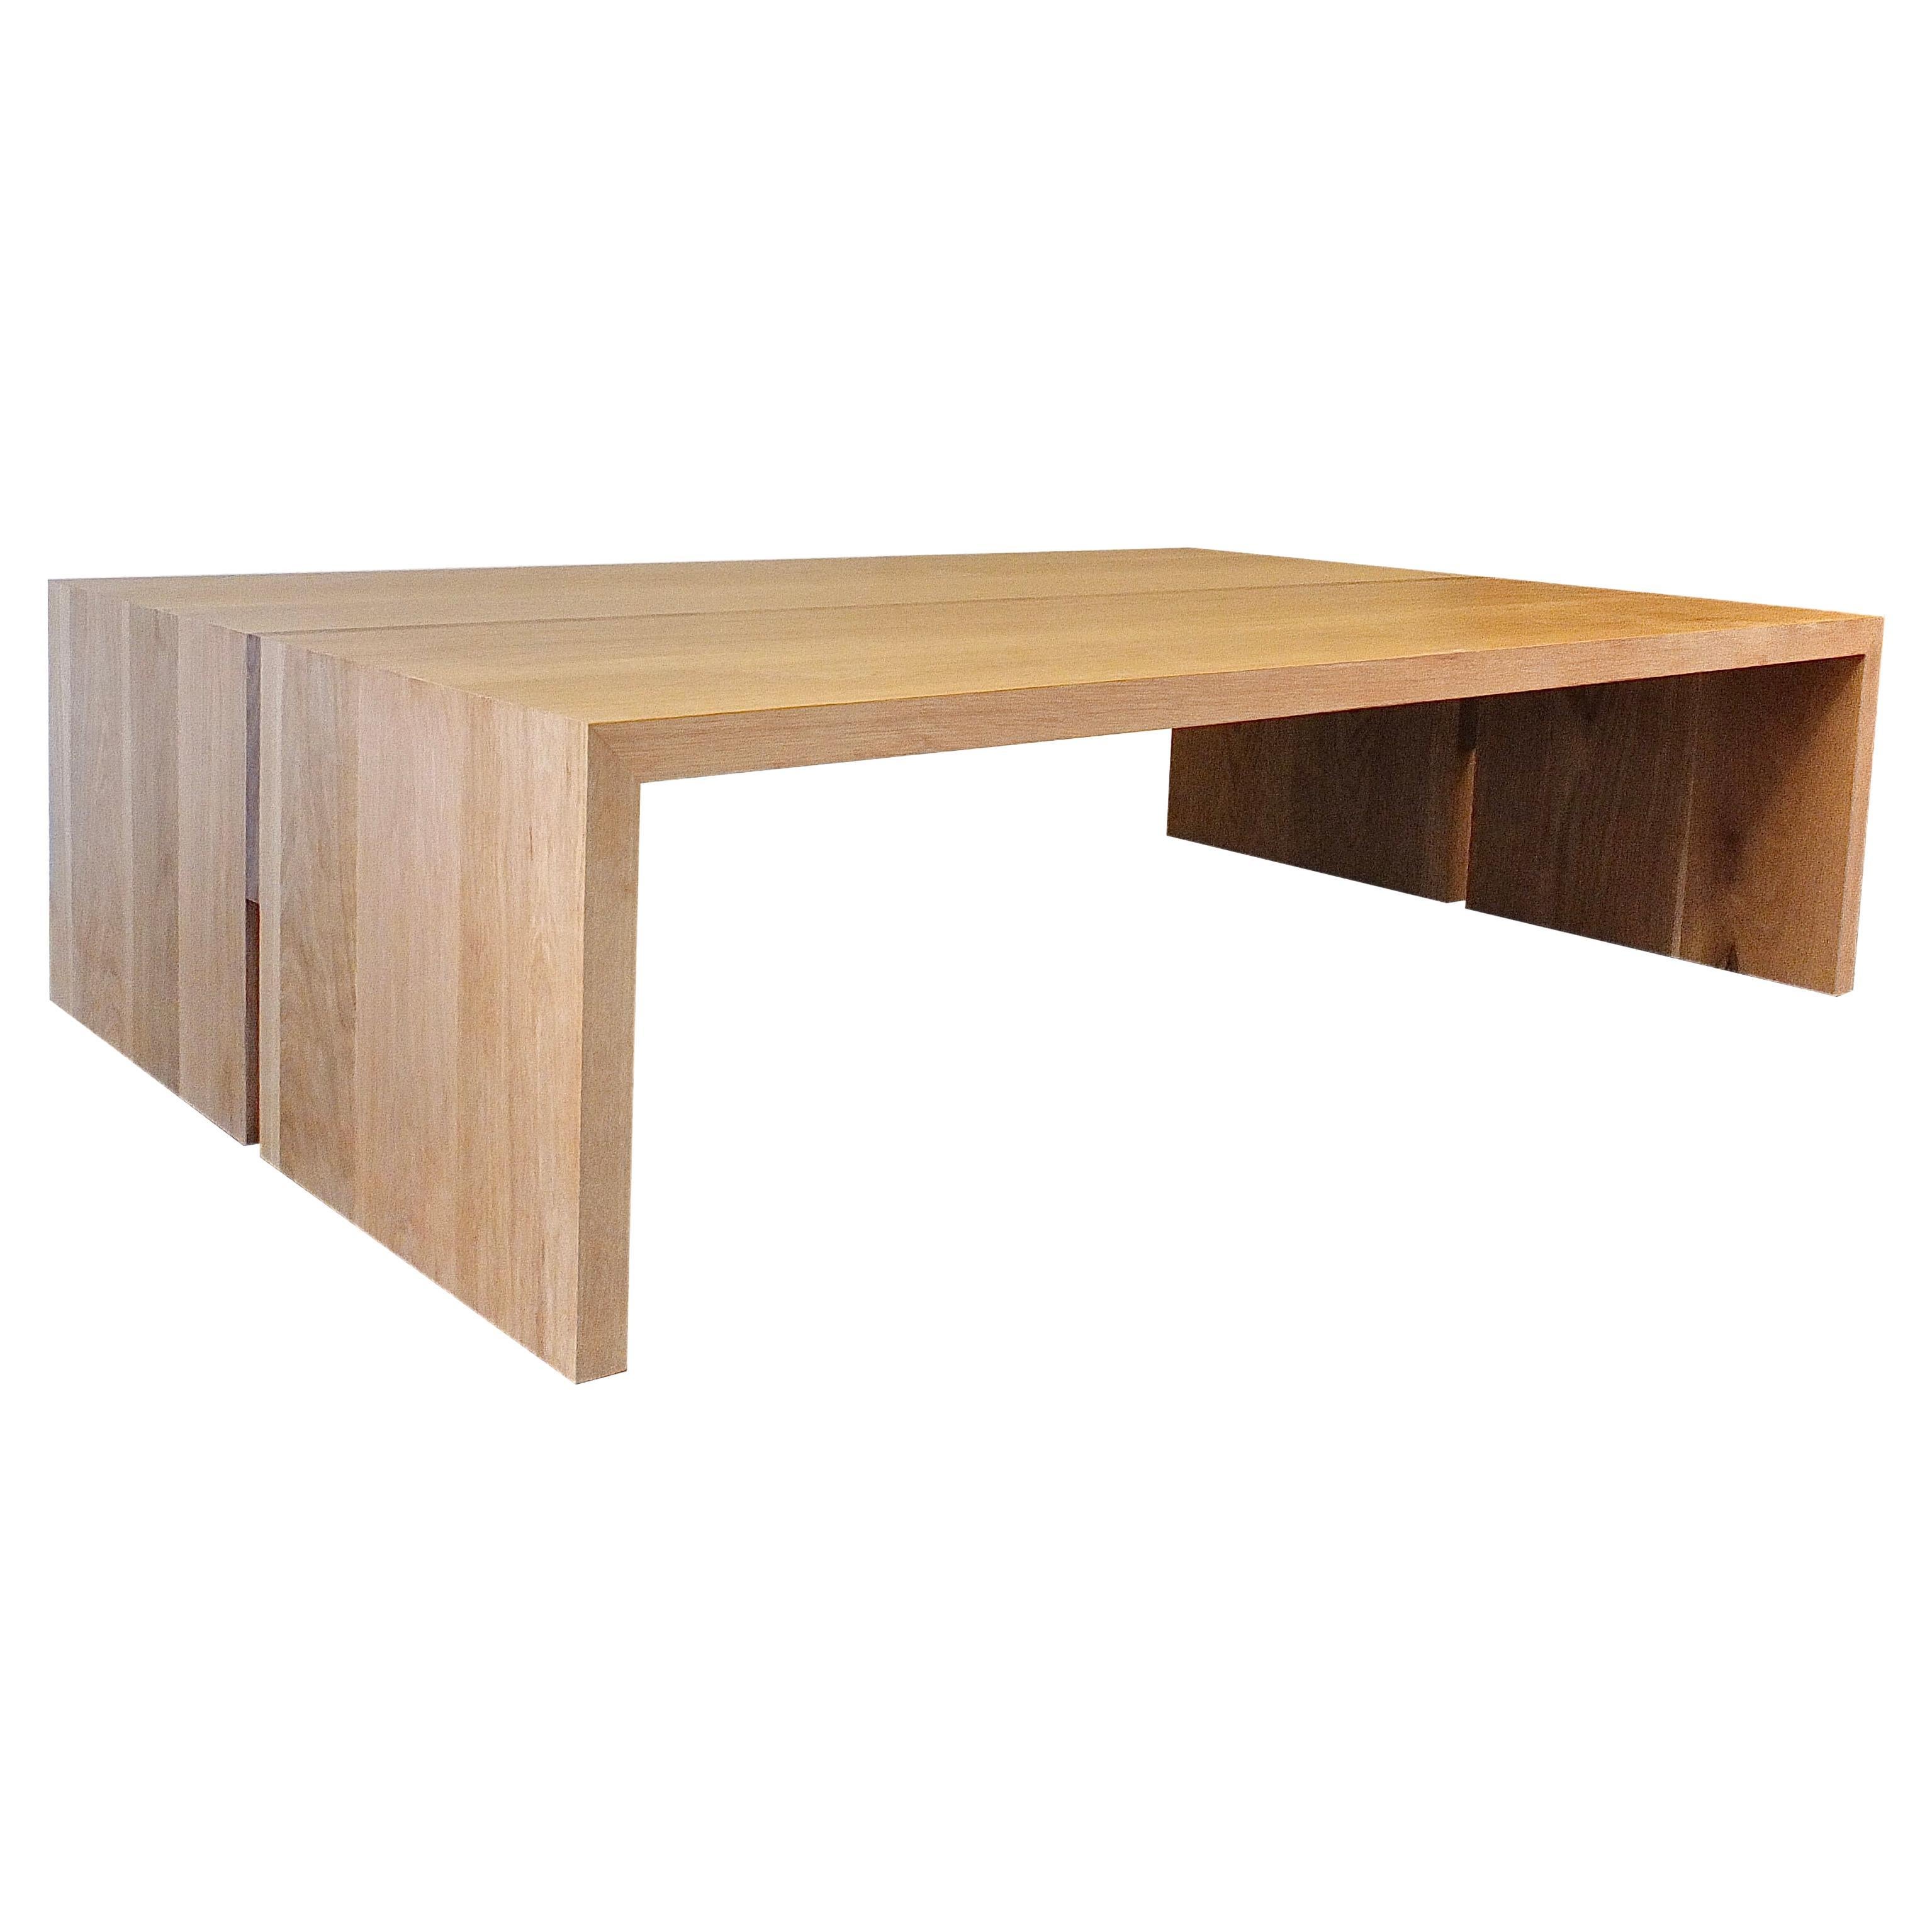 This custom coffee table is hand-made in the United States with all hardwood construction. It features a modern rectangle waterfall design with a solid white oak body and a minimalist walnut inlay detail. The inlay ends adding a unique lightness to